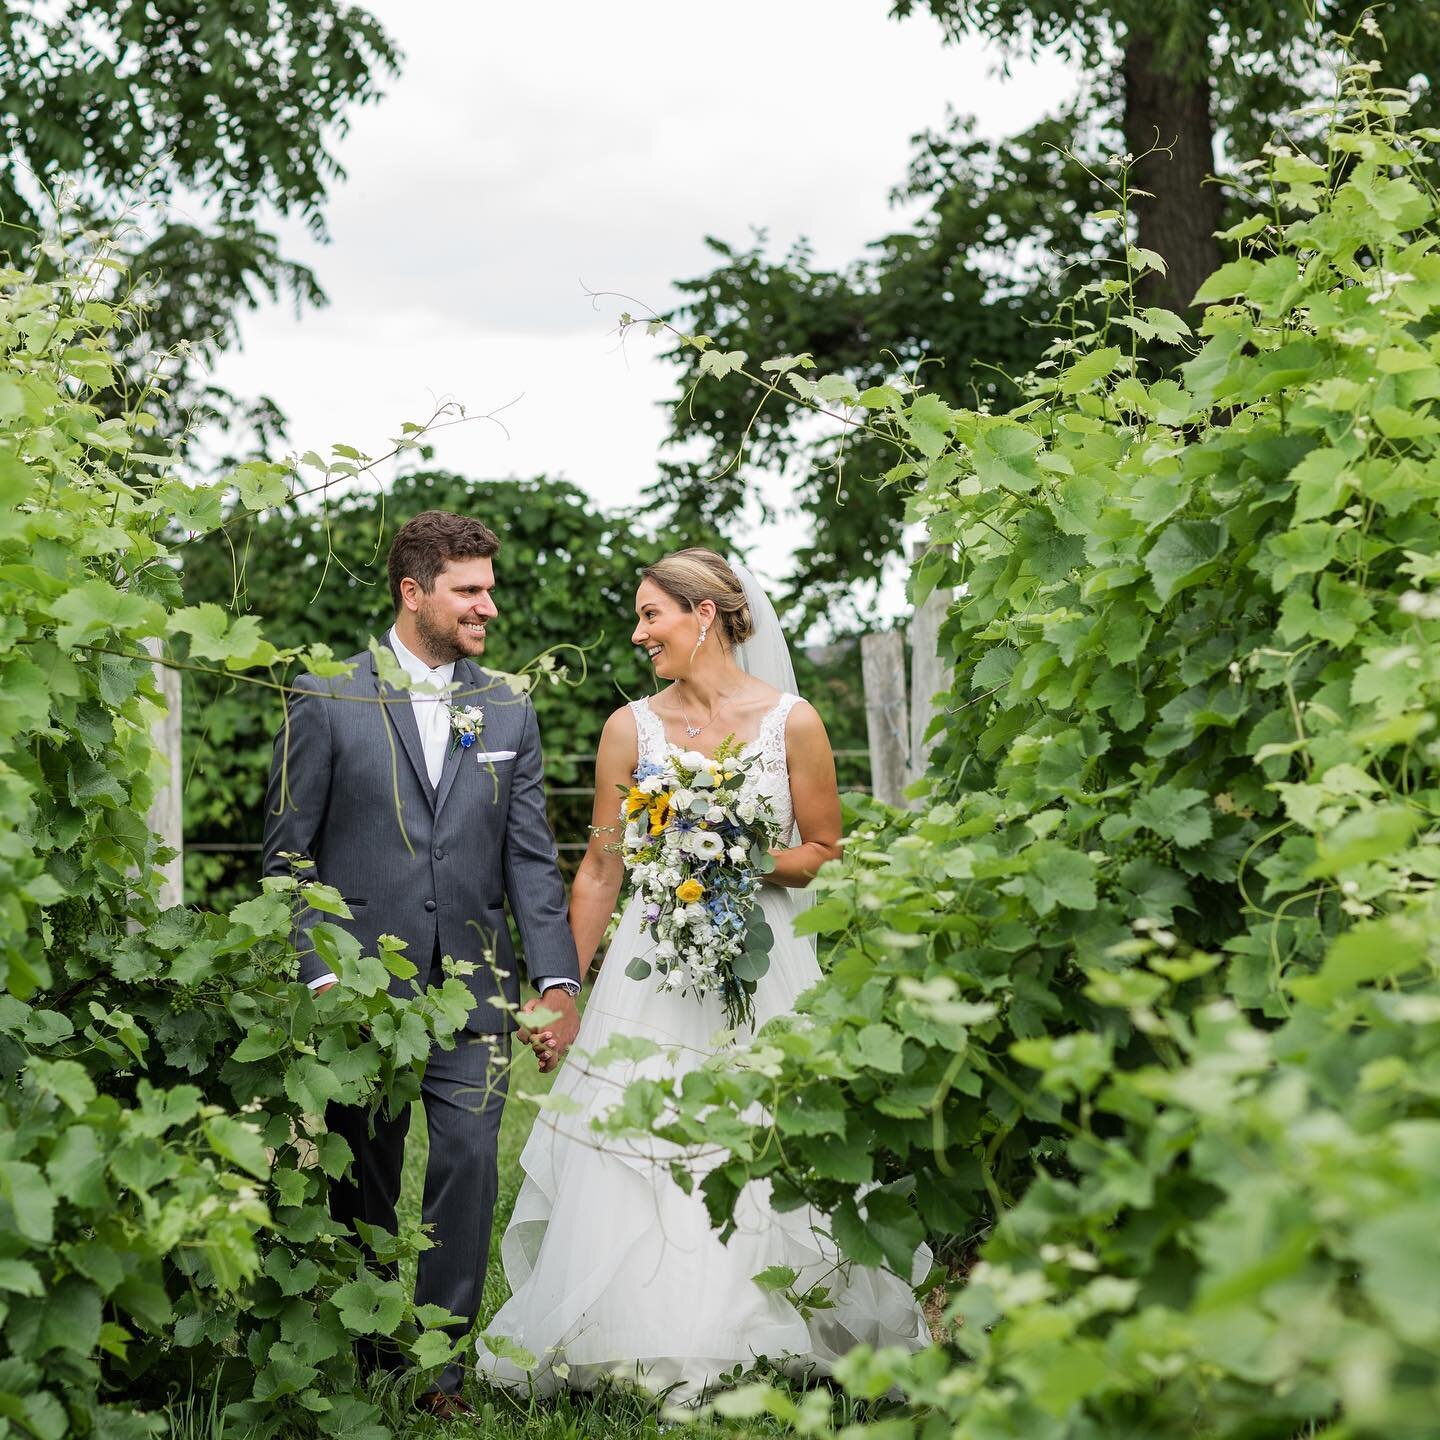 Last weekend at @deerrunwinery celebrating John and Rebecca was SO MUCH FUN!  Today we&rsquo;re lucky to be spending this rainy day home and catching up on edits! 🥰
#deerrunwinery #livco #livingstoncounty #vineyardwedding #lassandbeau #thehappynow #